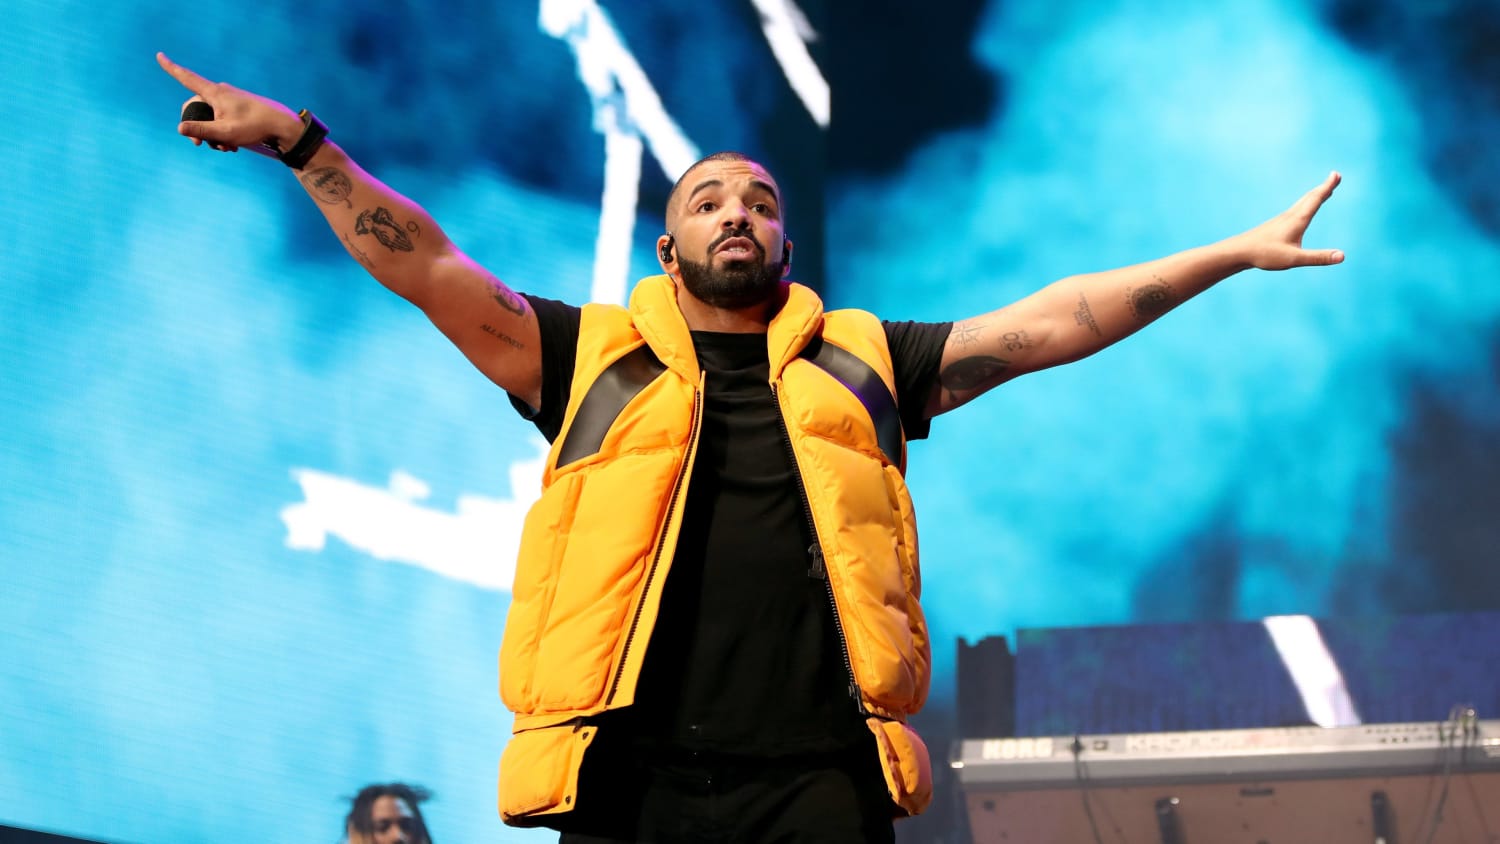 Check Out Drake’s Insane Jewelry Collection